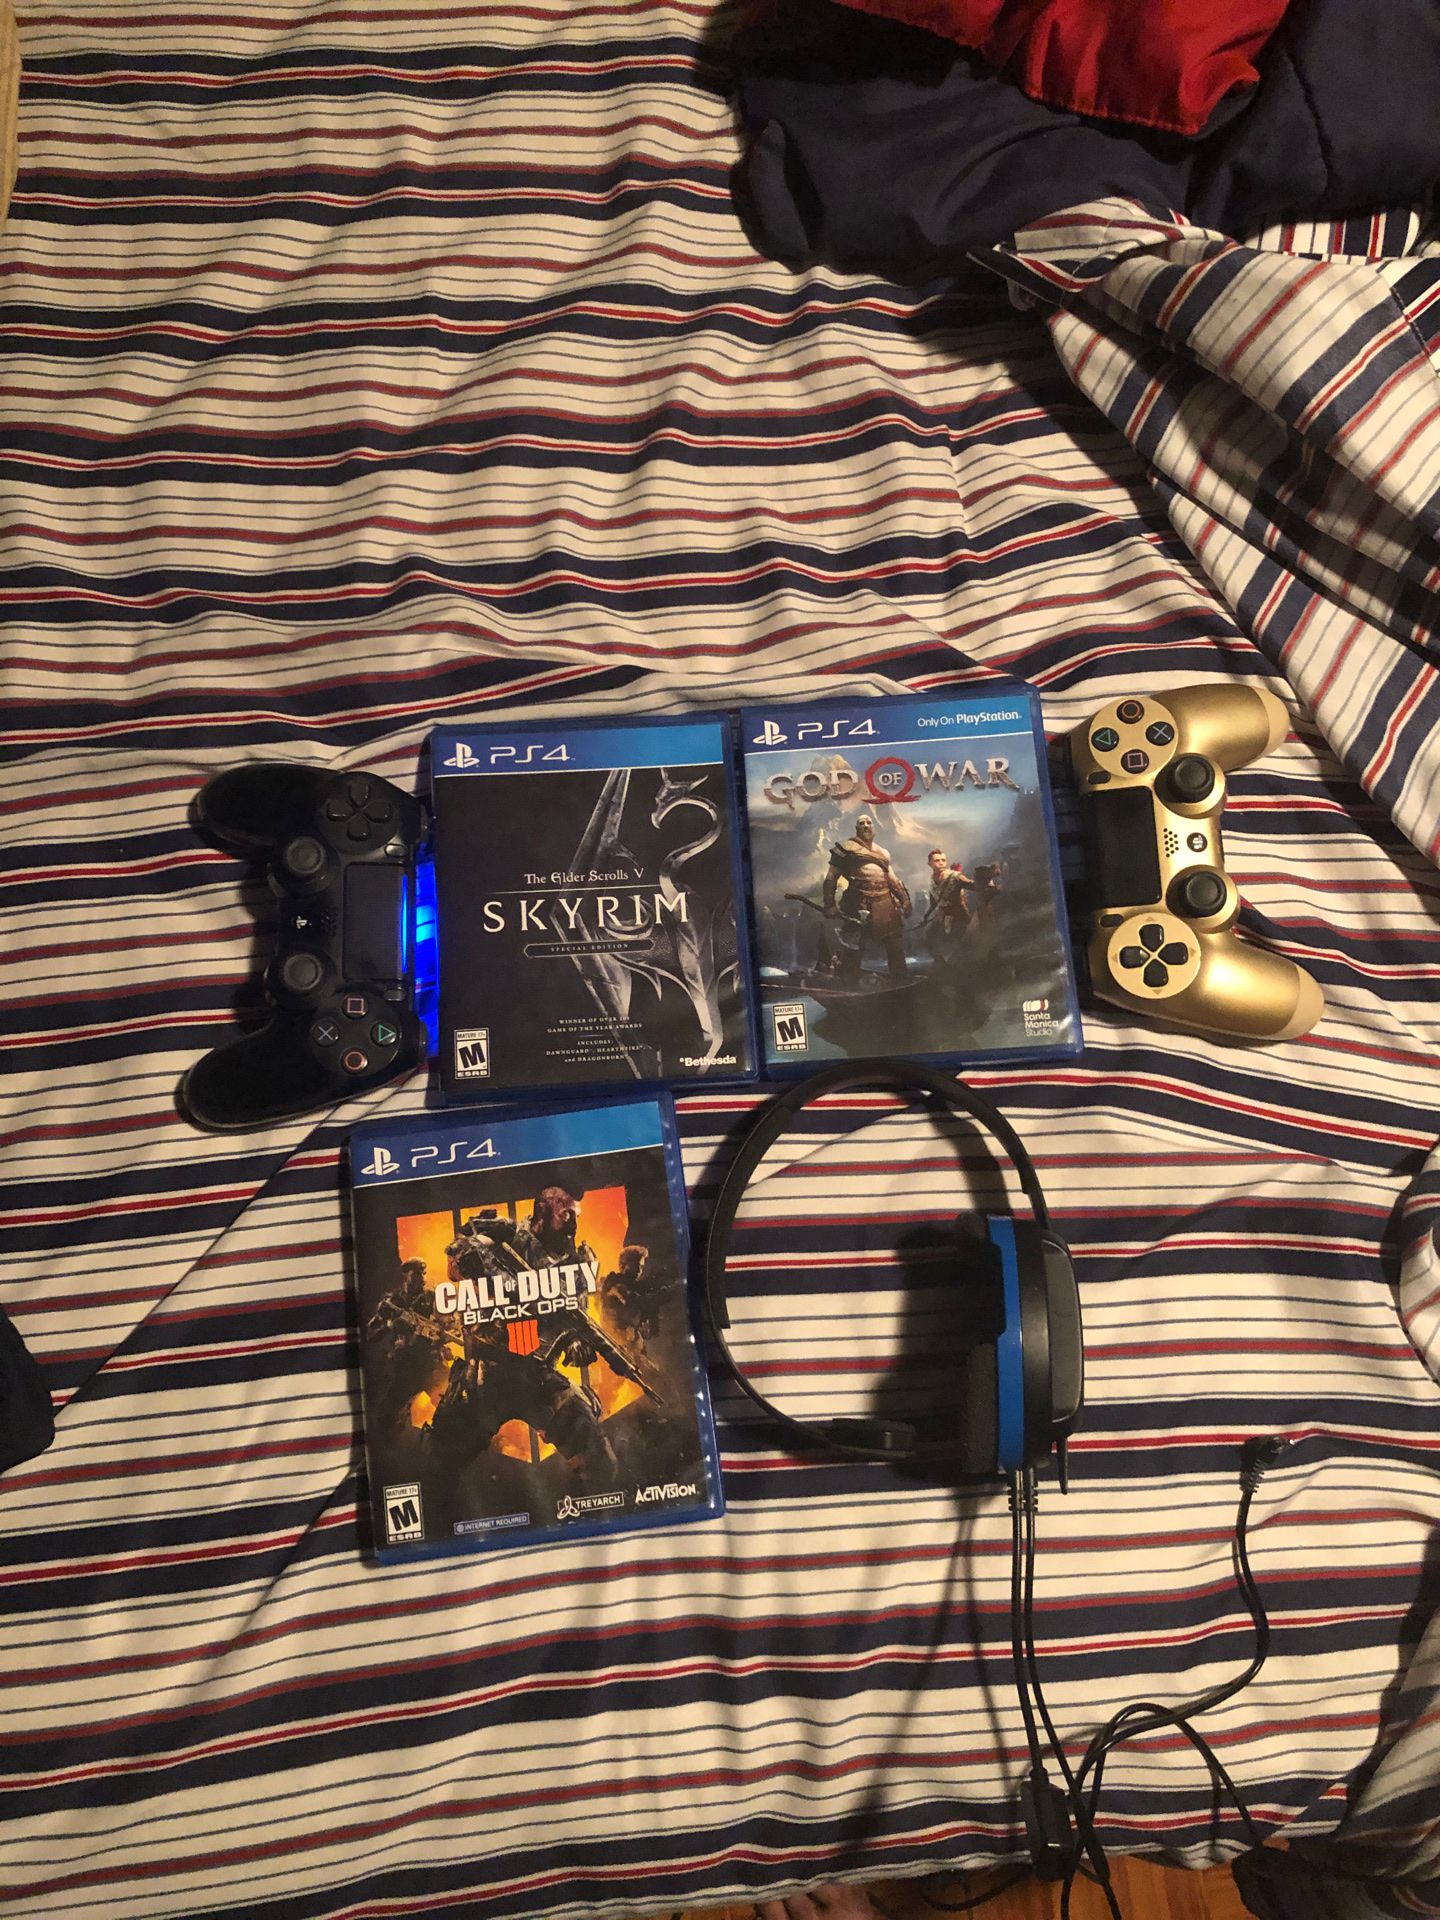 Ps4 controllers, skyrim, black ops 4, god of war turtle beach headset